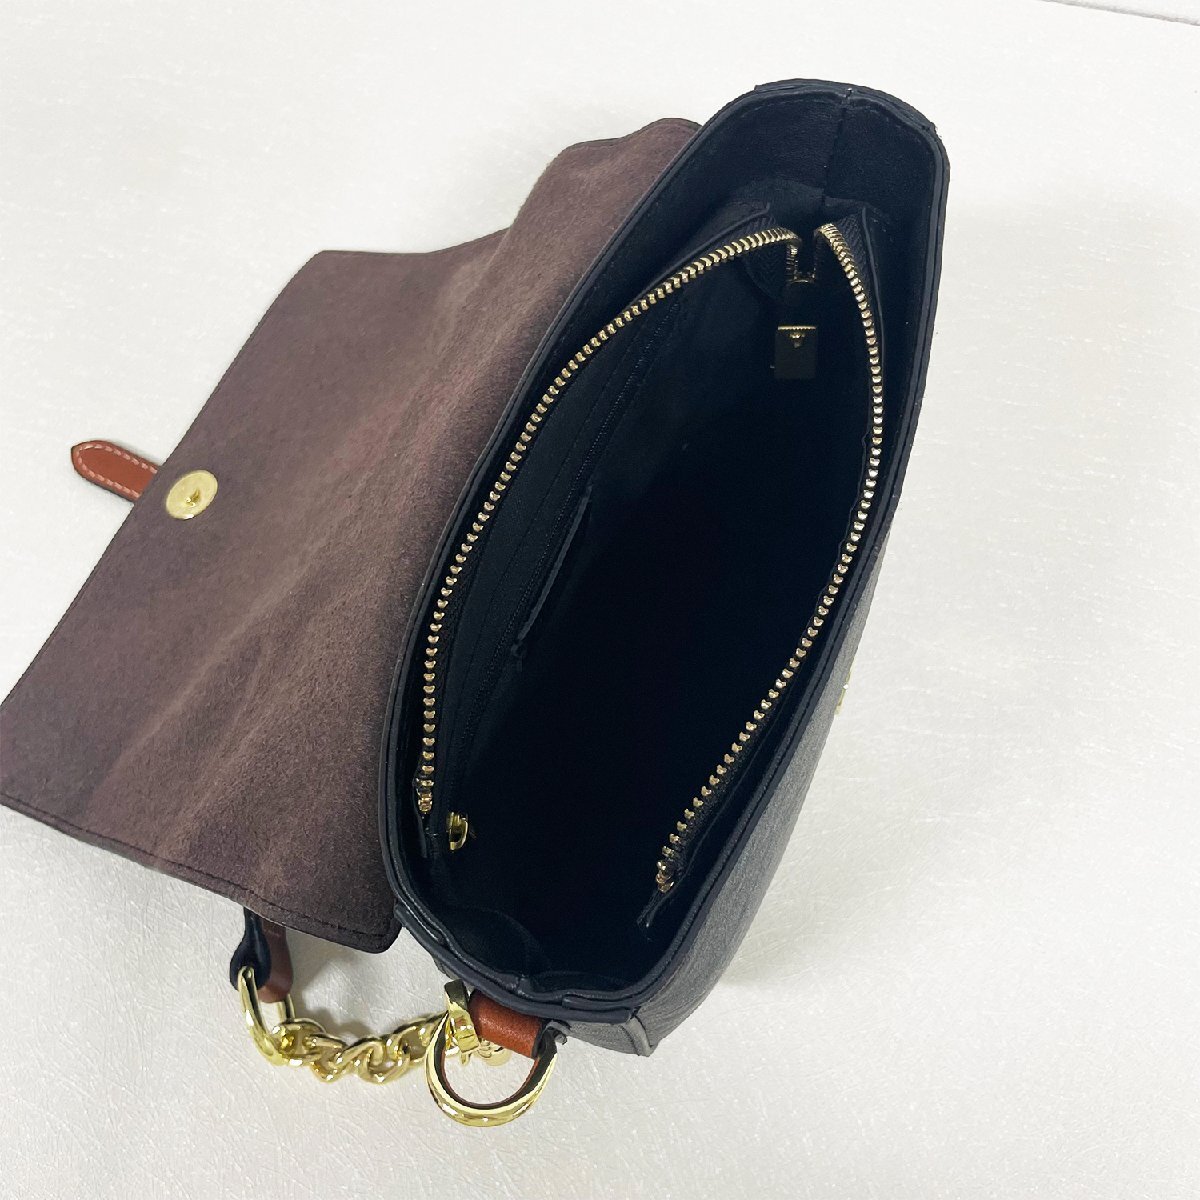  on goods Europe made * regular price 12 ten thousand * BVLGARY a departure *RISELIN handbag original leather cow leather 2way compact shoulder .. shoulder bag commuting OL lady's 